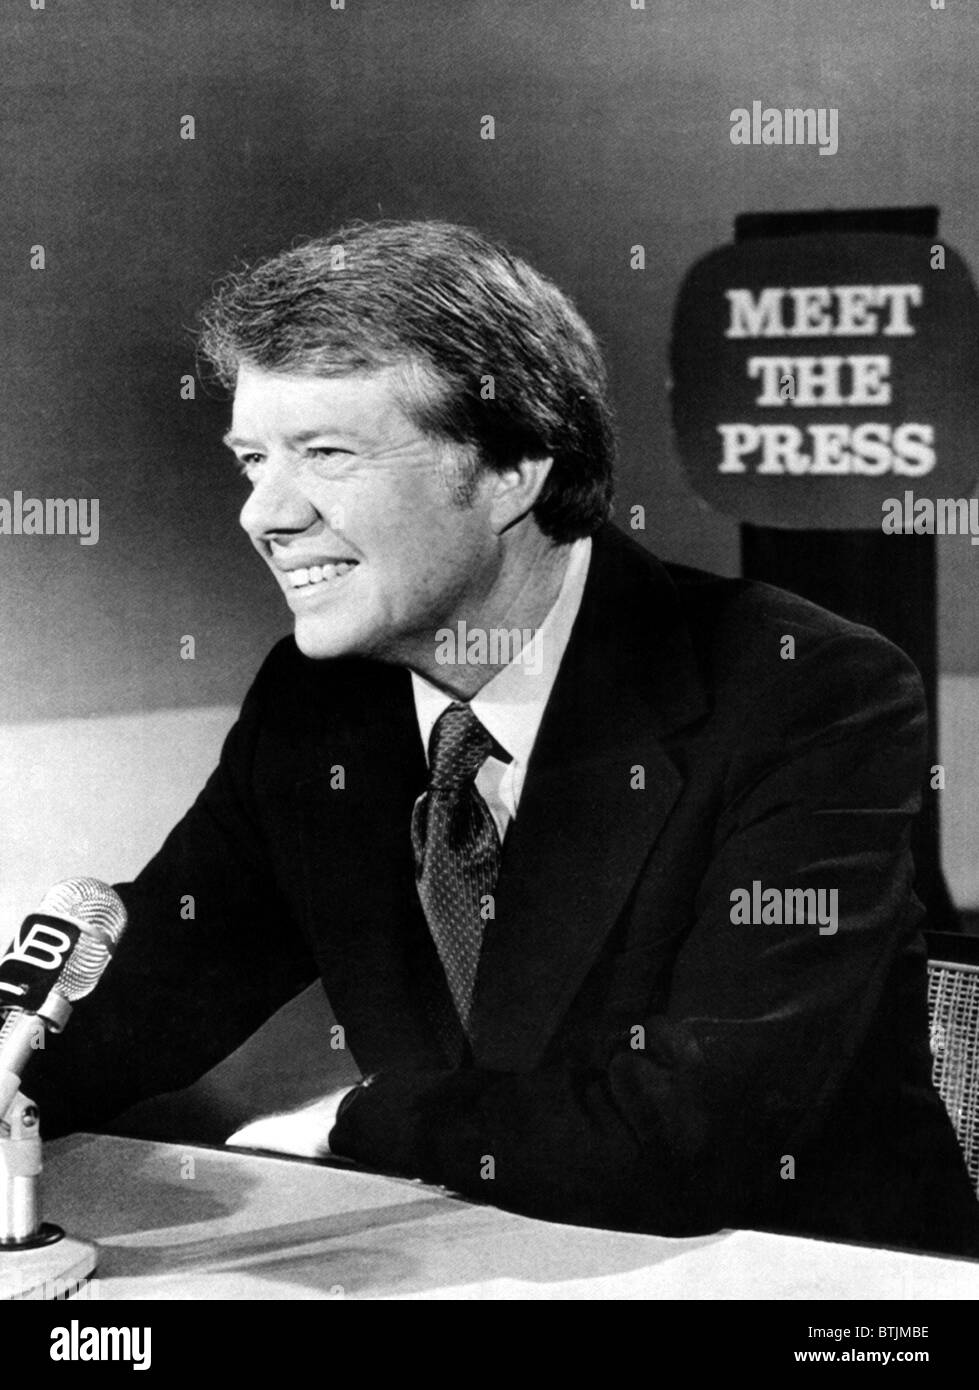 Governor Jimmy Carter, Democratic presidential candidate, 1975. Courtesy: CSU Archives/Everett Collection Stock Photo